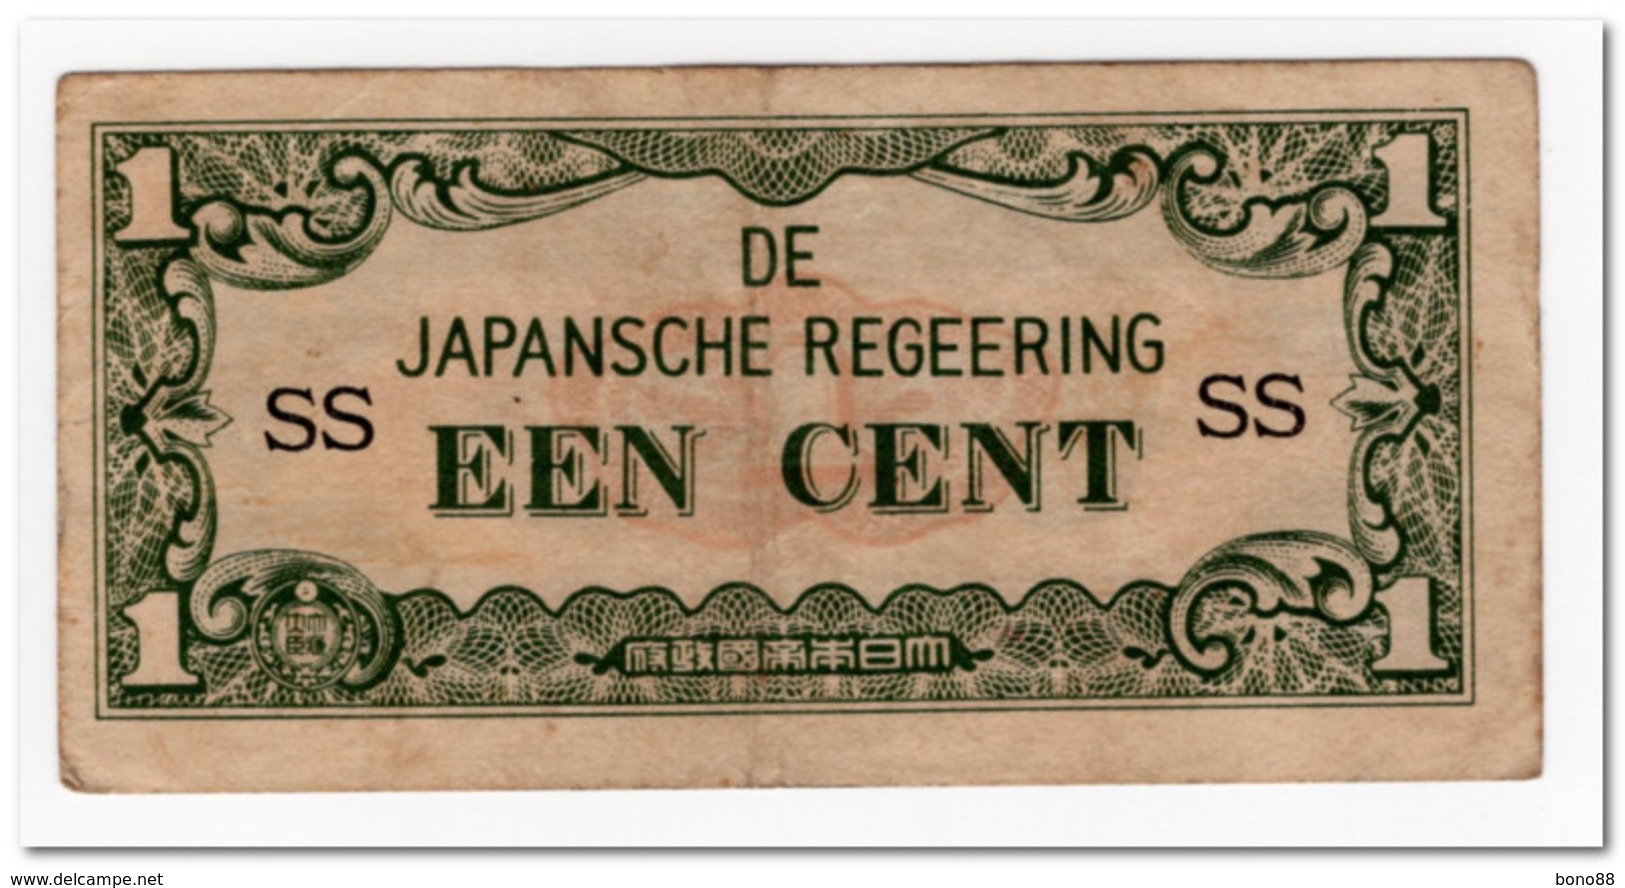 NETHERLANDS INDIES,JAPANESE GOVERNEMENT,1 CENT,1942,P.119, VF+ - Indochine